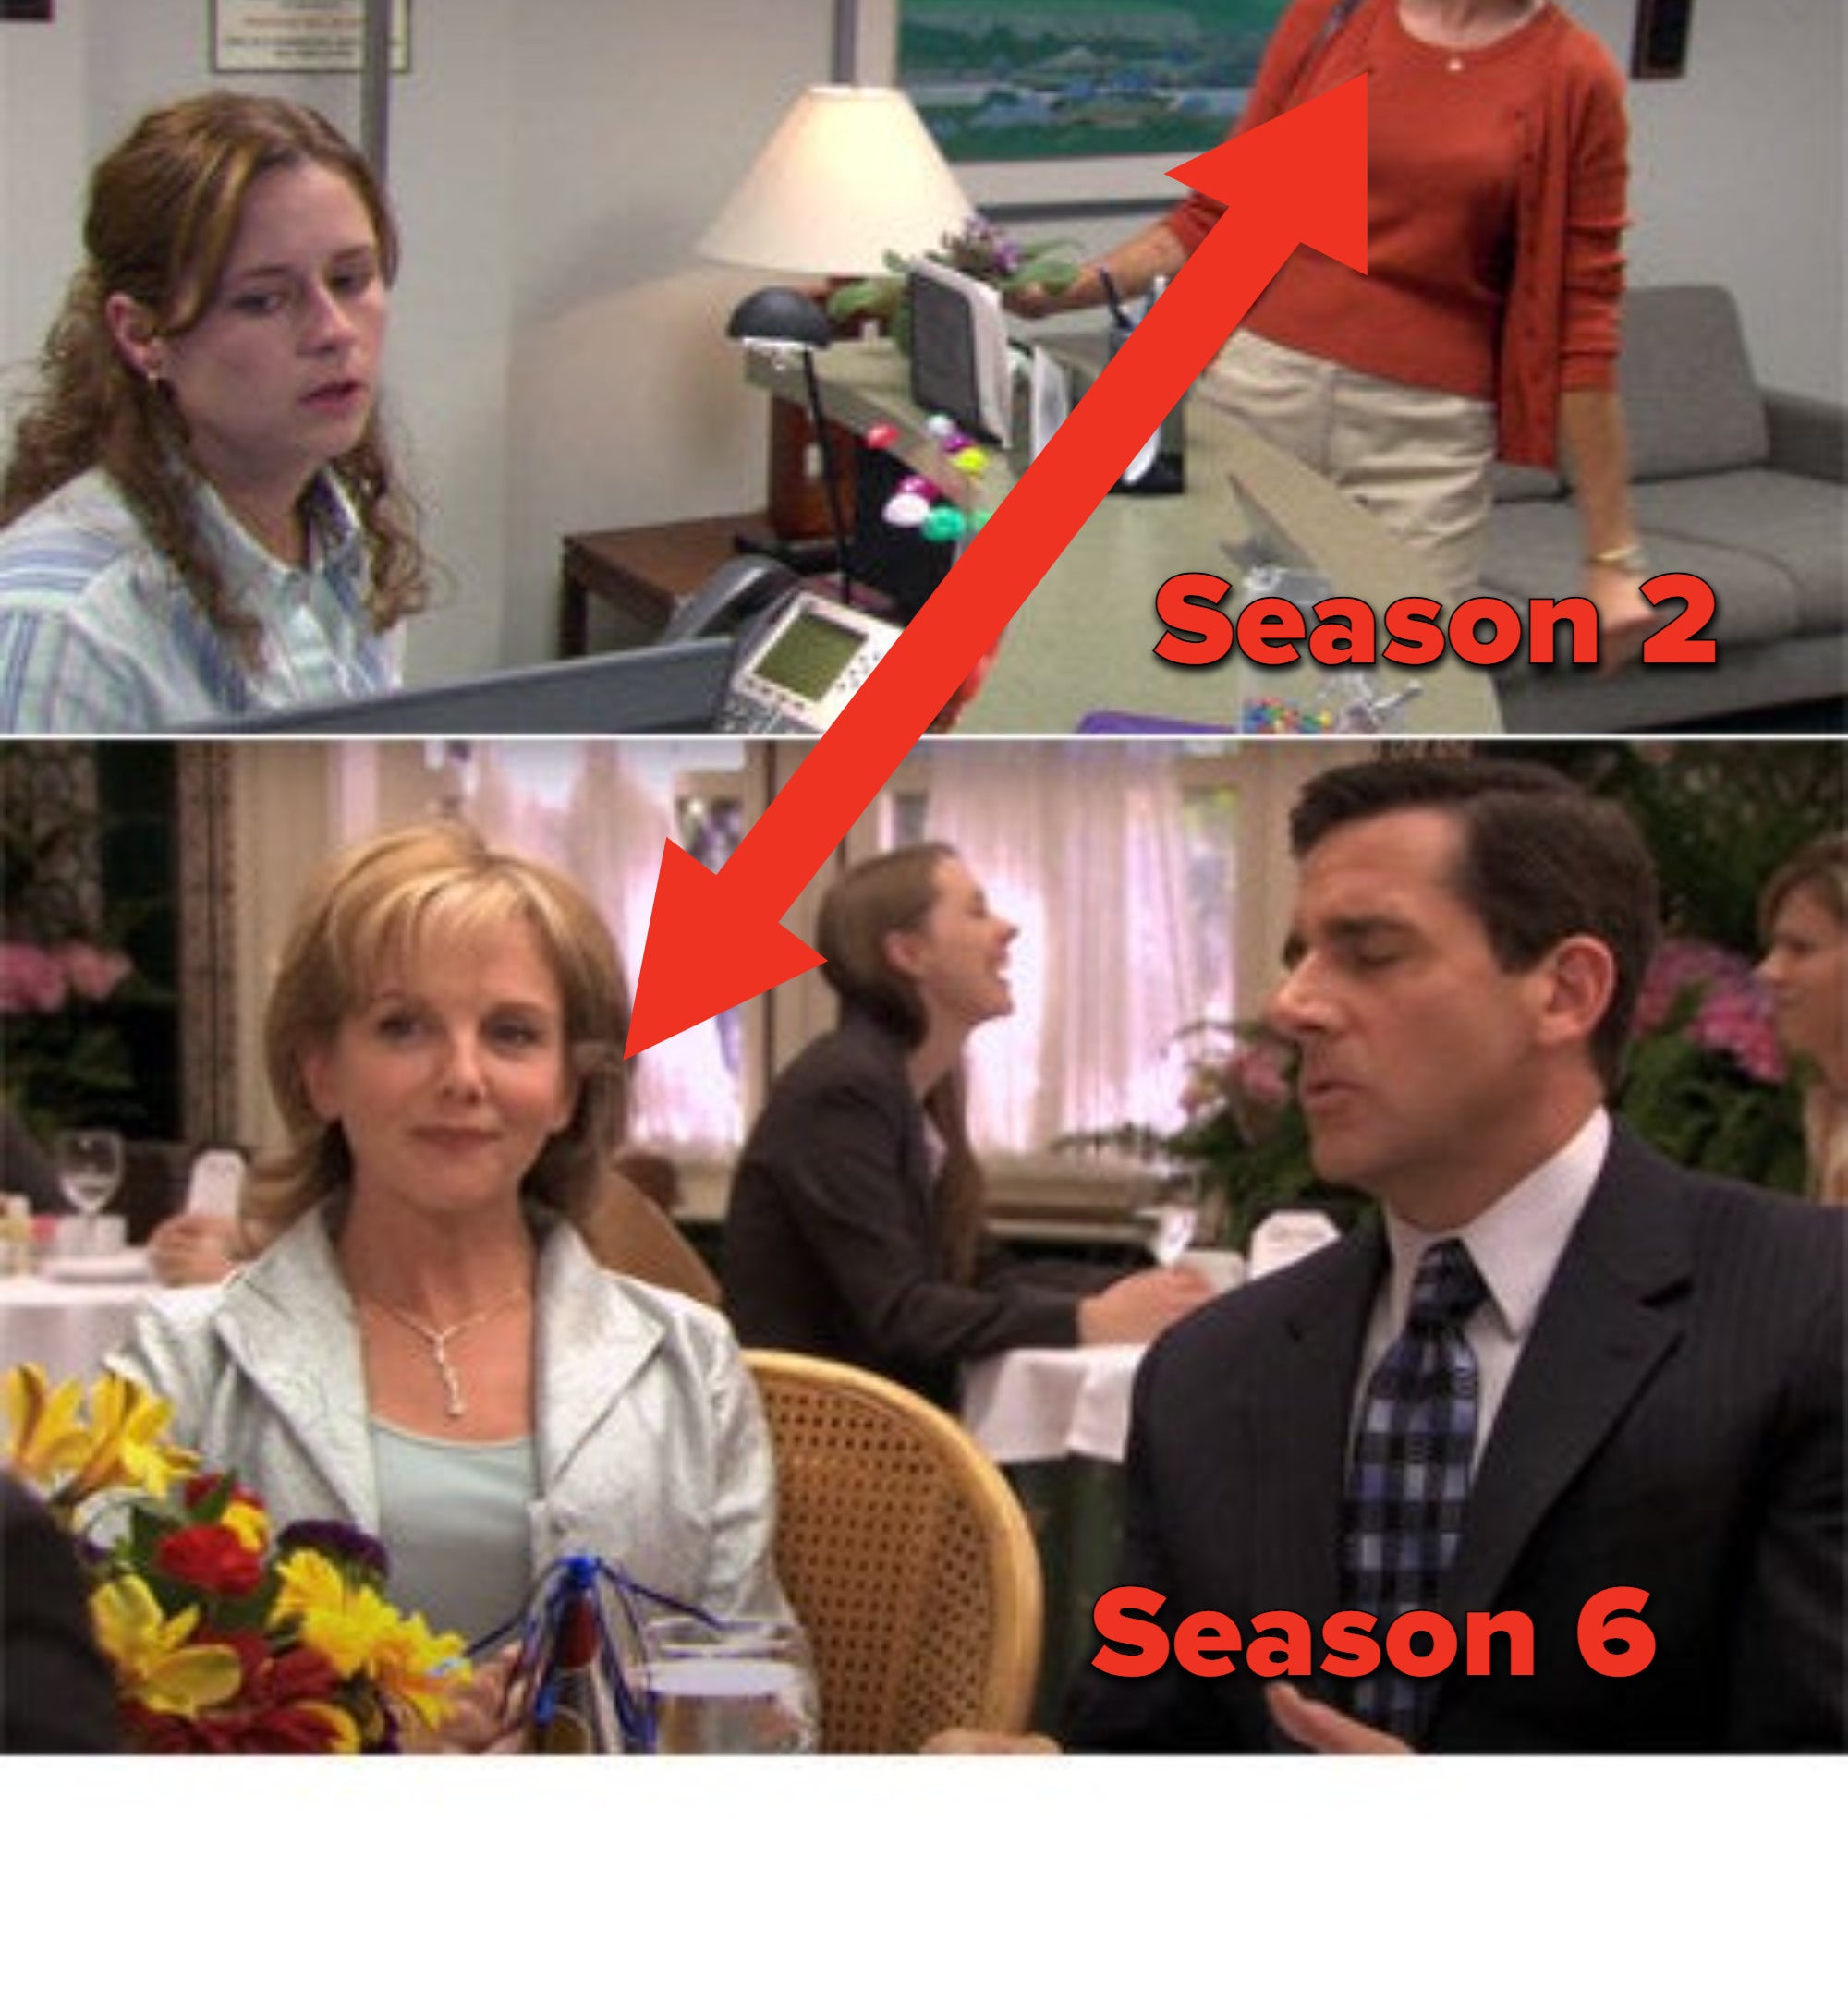 Pam's mom in seasons 2 and 6 played by different actors